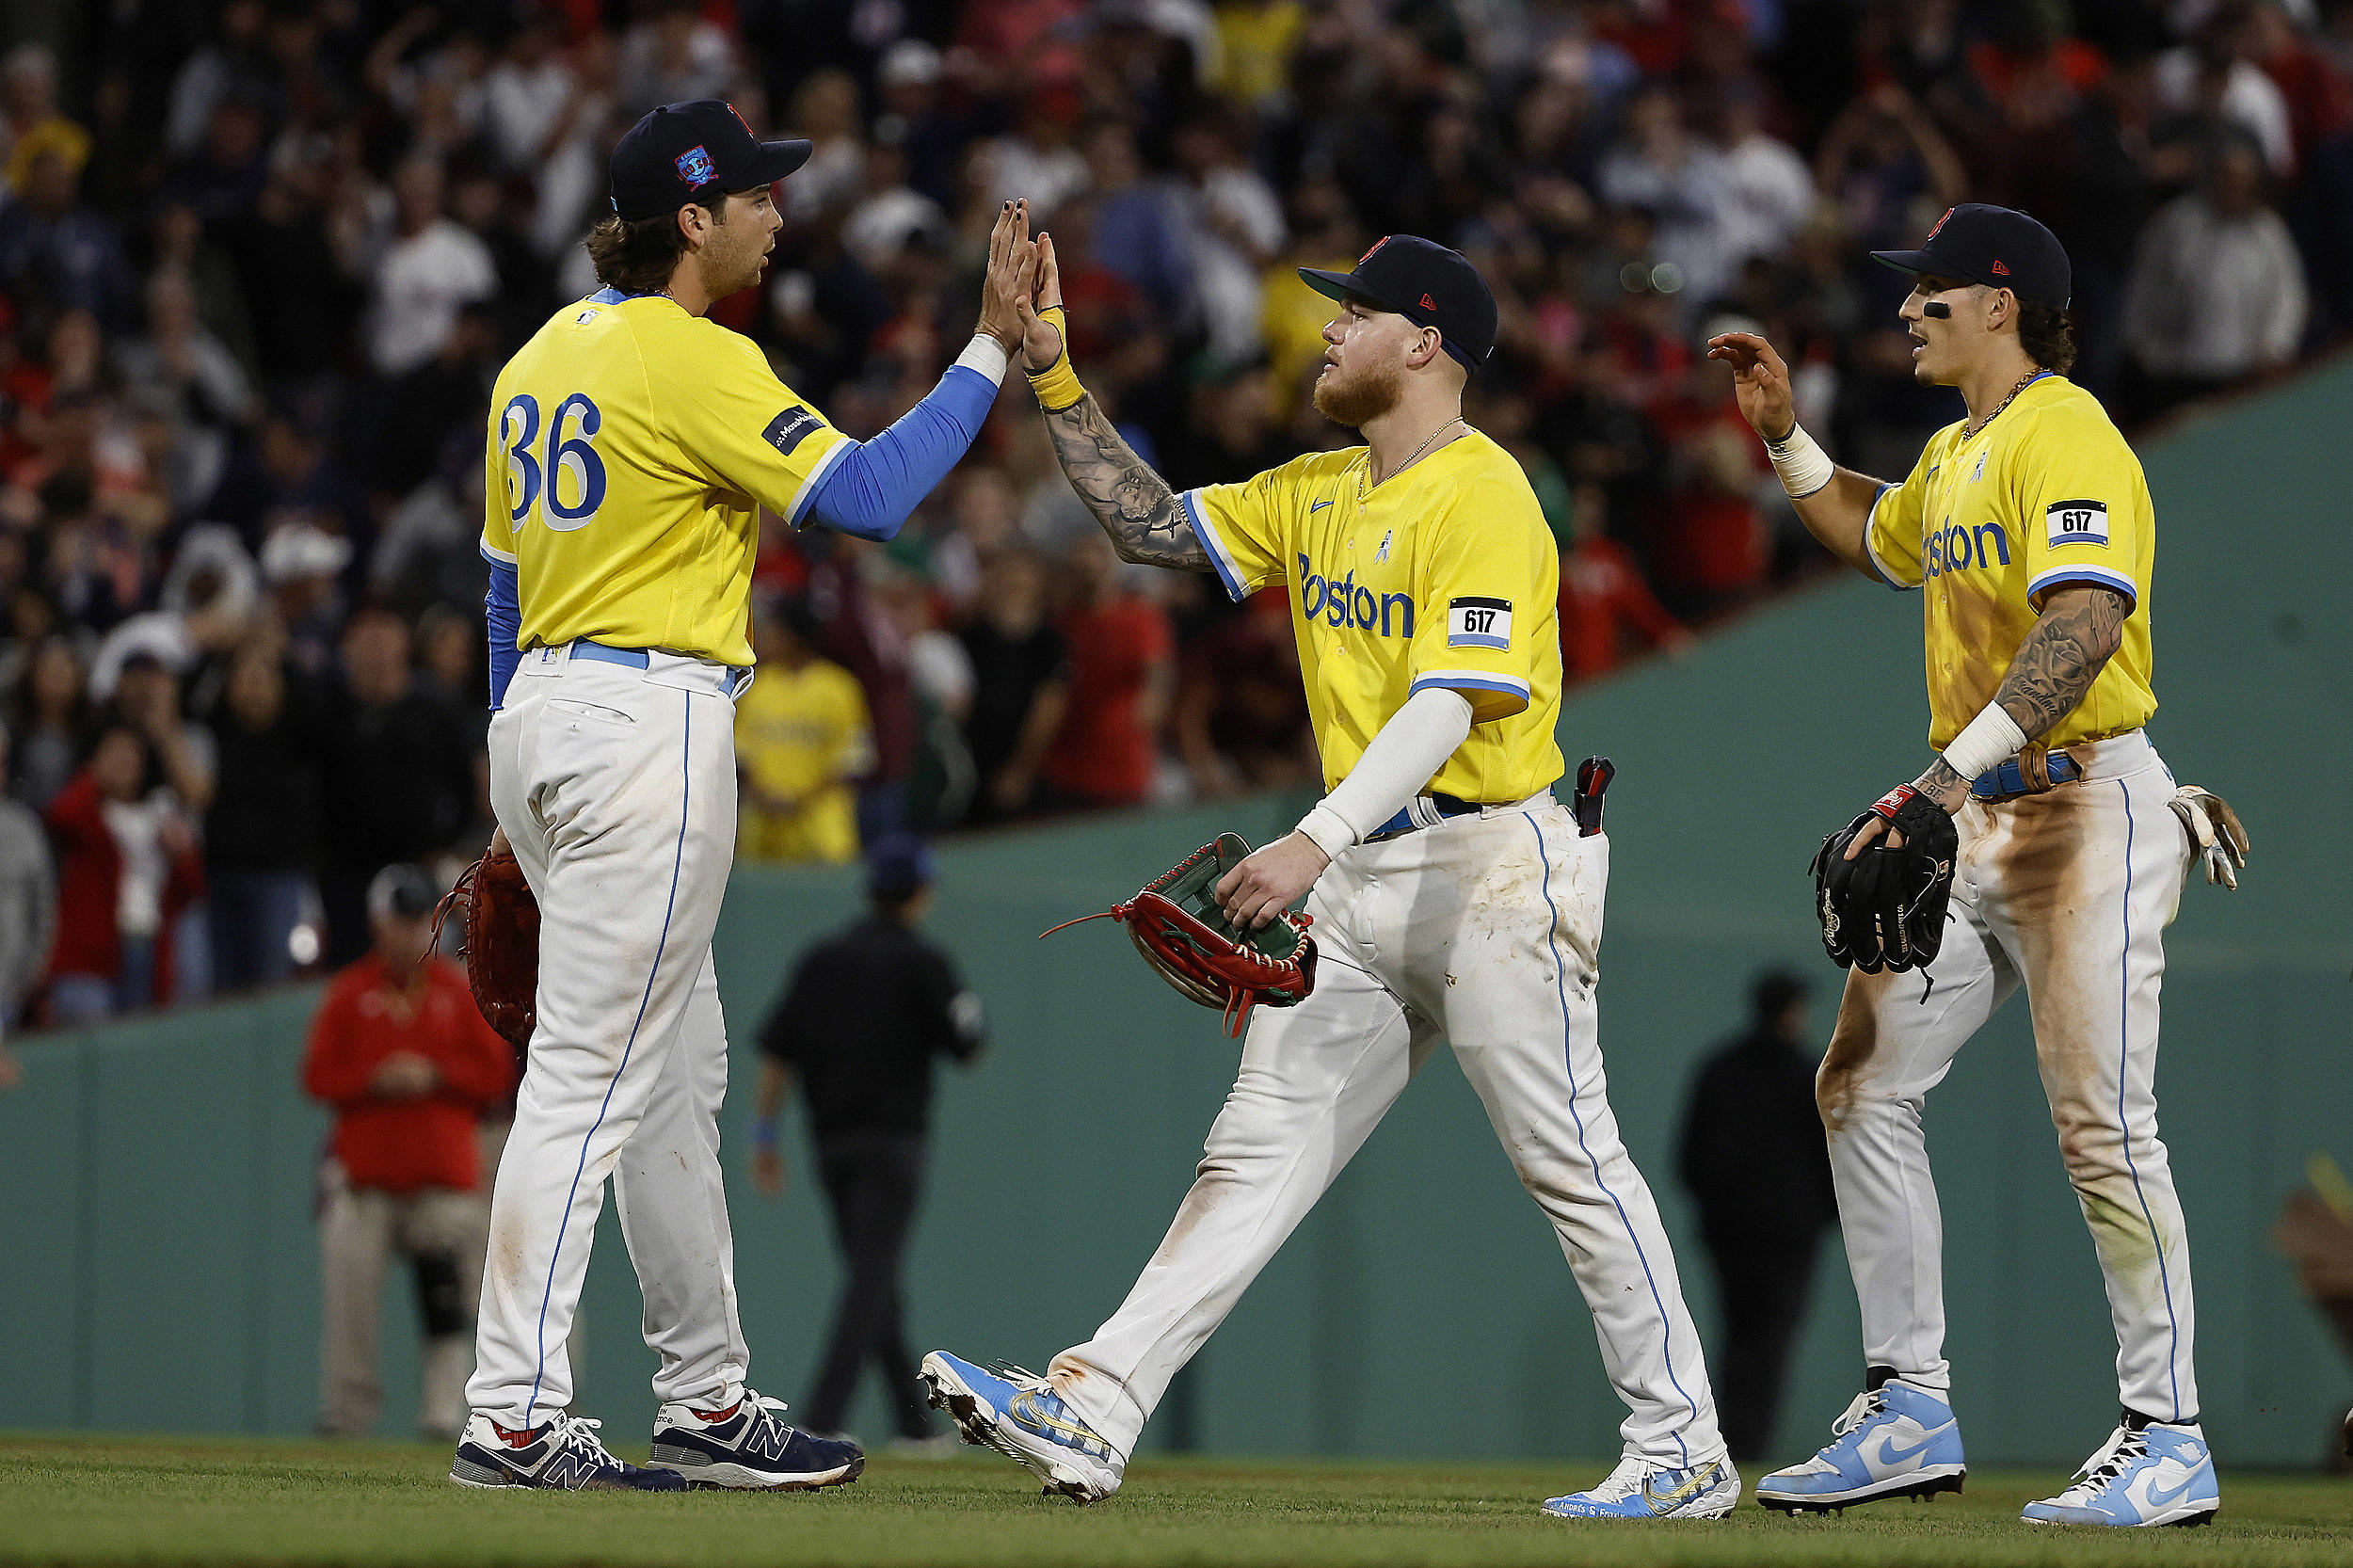 Why do the Red Sox wear yellow jerseys?